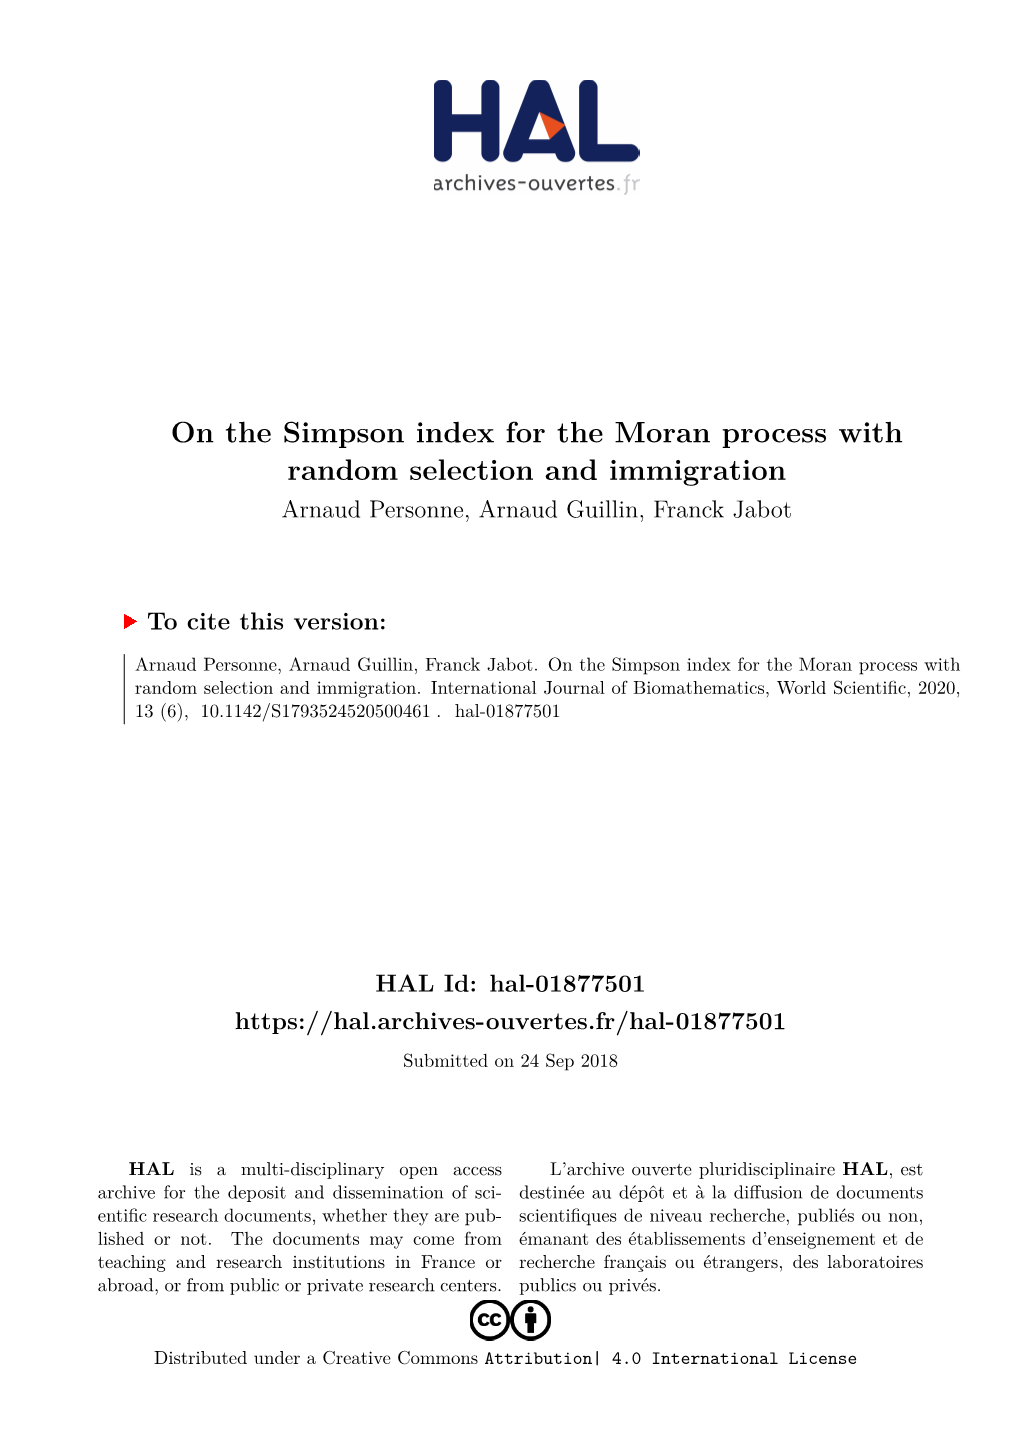 On the Simpson Index for the Moran Process with Random Selection and Immigration Arnaud Personne, Arnaud Guillin, Franck Jabot